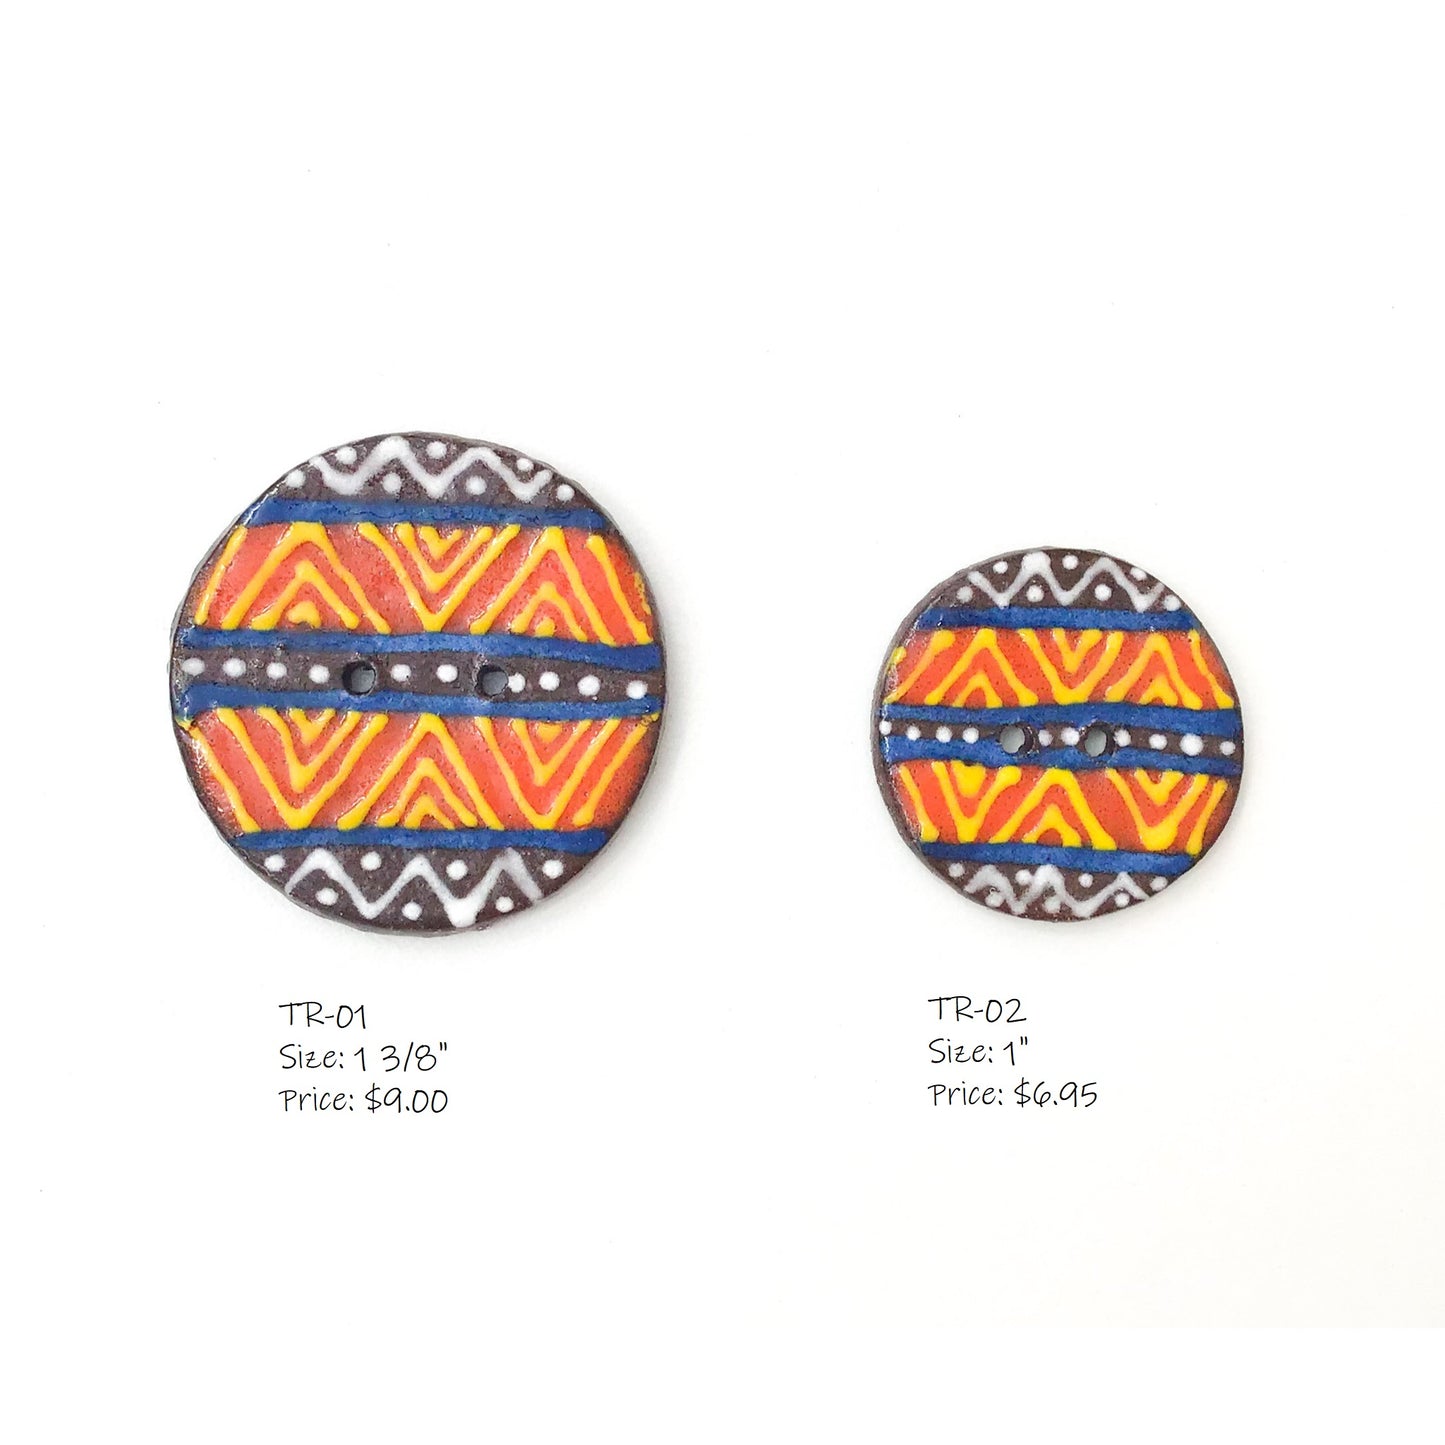 Tribal Button Collection: Simple Design and Contrasting Colors in African Motifs